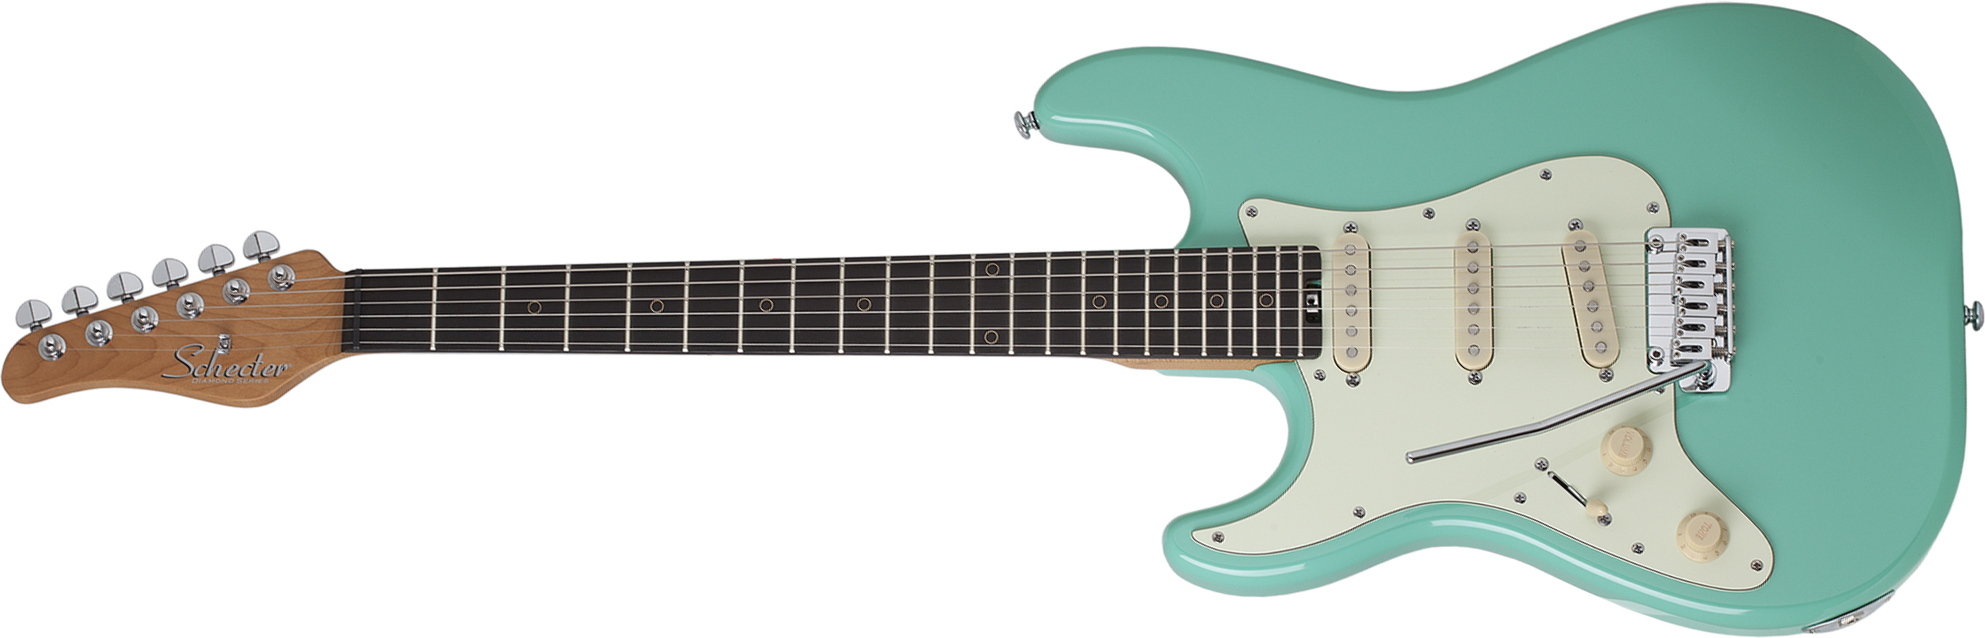 Schecter Nick Johnston Traditional Gaucher Signature 3s Trem Eb - Atomic Green - Left-handed electric guitar - Main picture